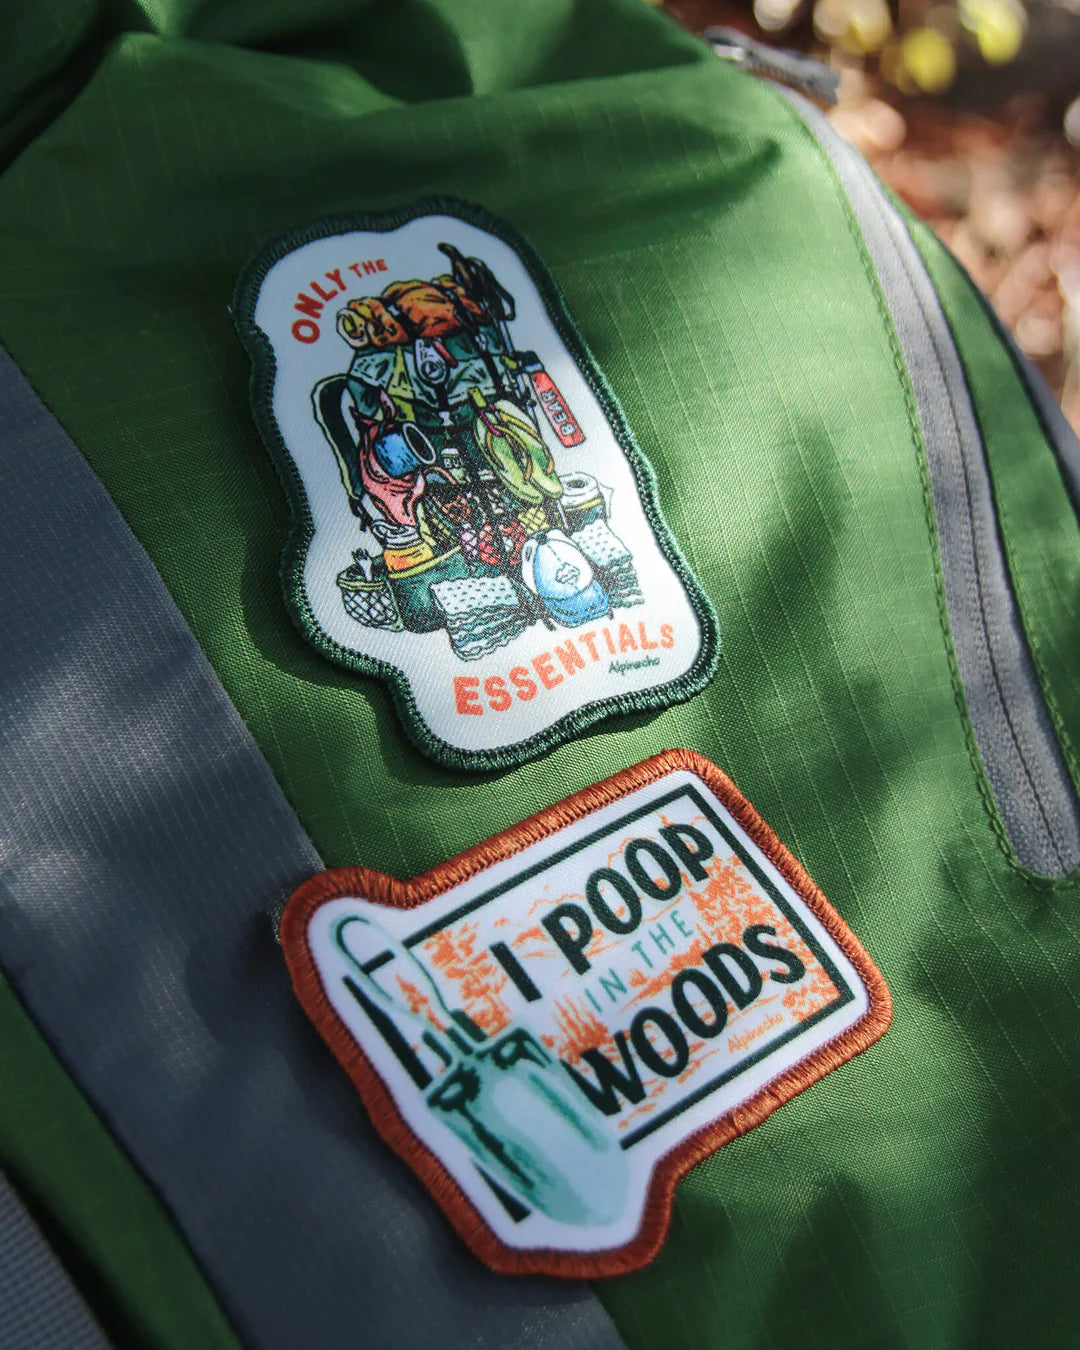 ONLY THE ESSENTIALS patch